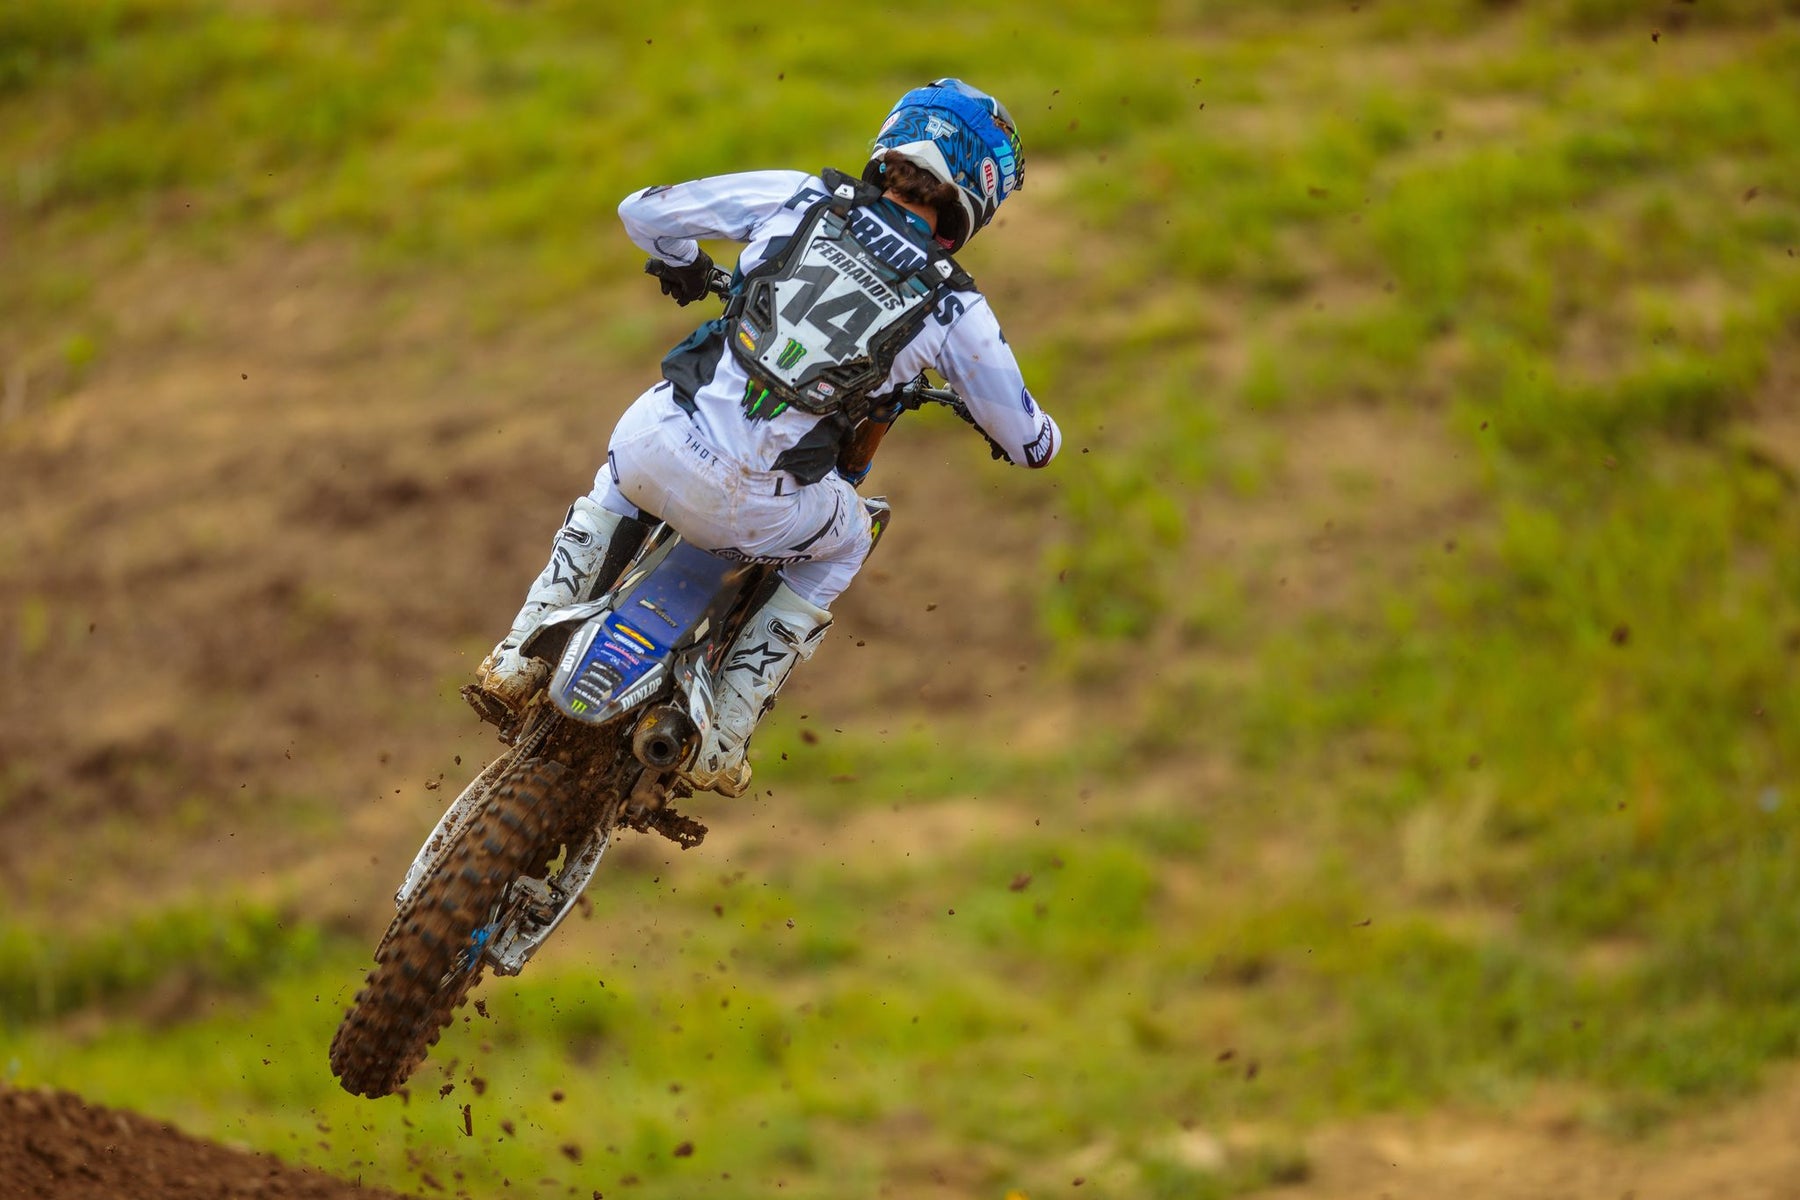 DYLAN FERRANDIS STORMS TO 450MX VICTORY AT HIGH POINT NATIONAL, MT. MORRIS, PENNSYLVANIA; ELI TOMAC THIRD